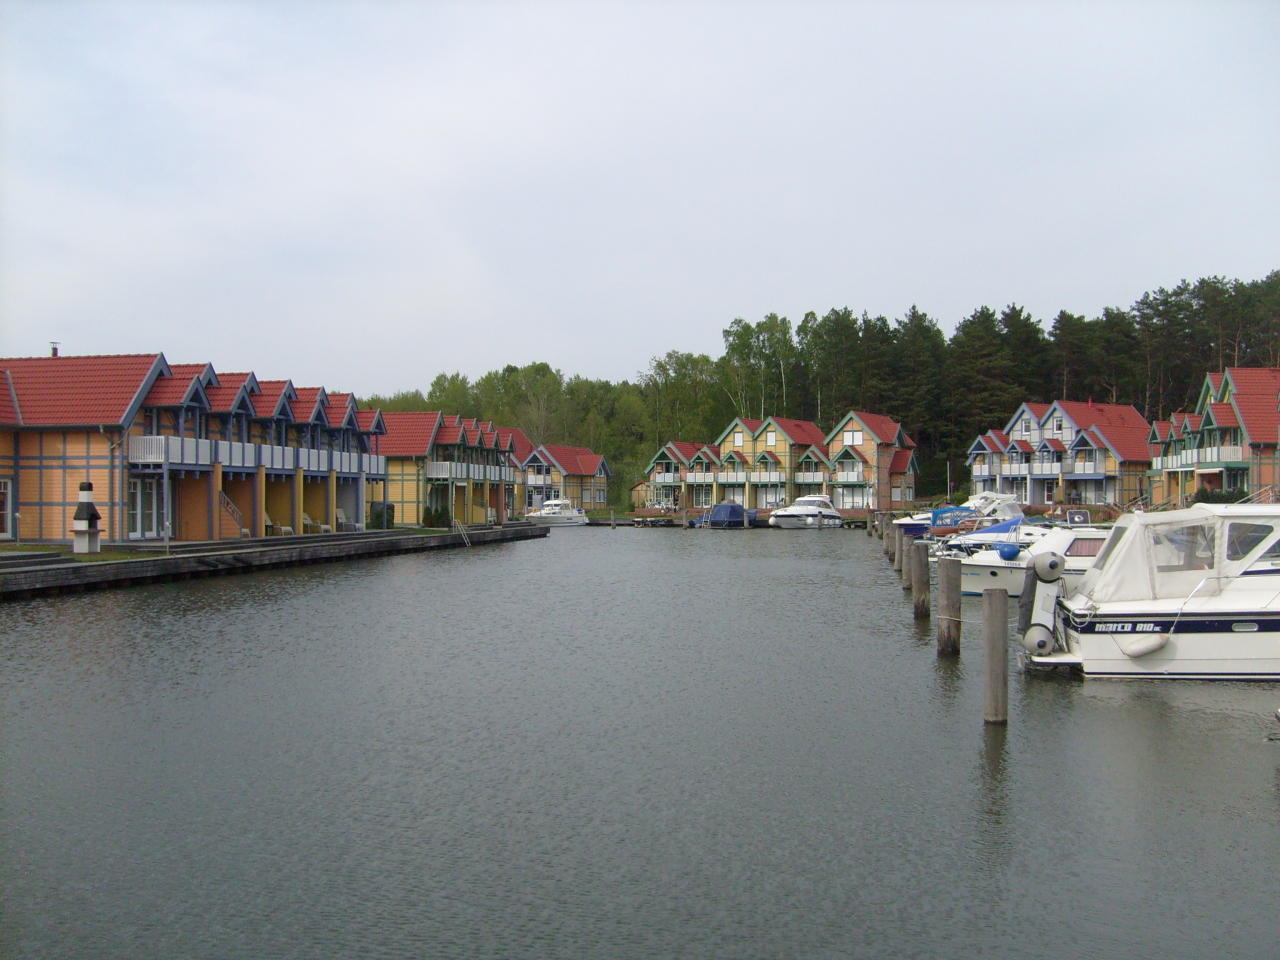 a row of houses along side the water